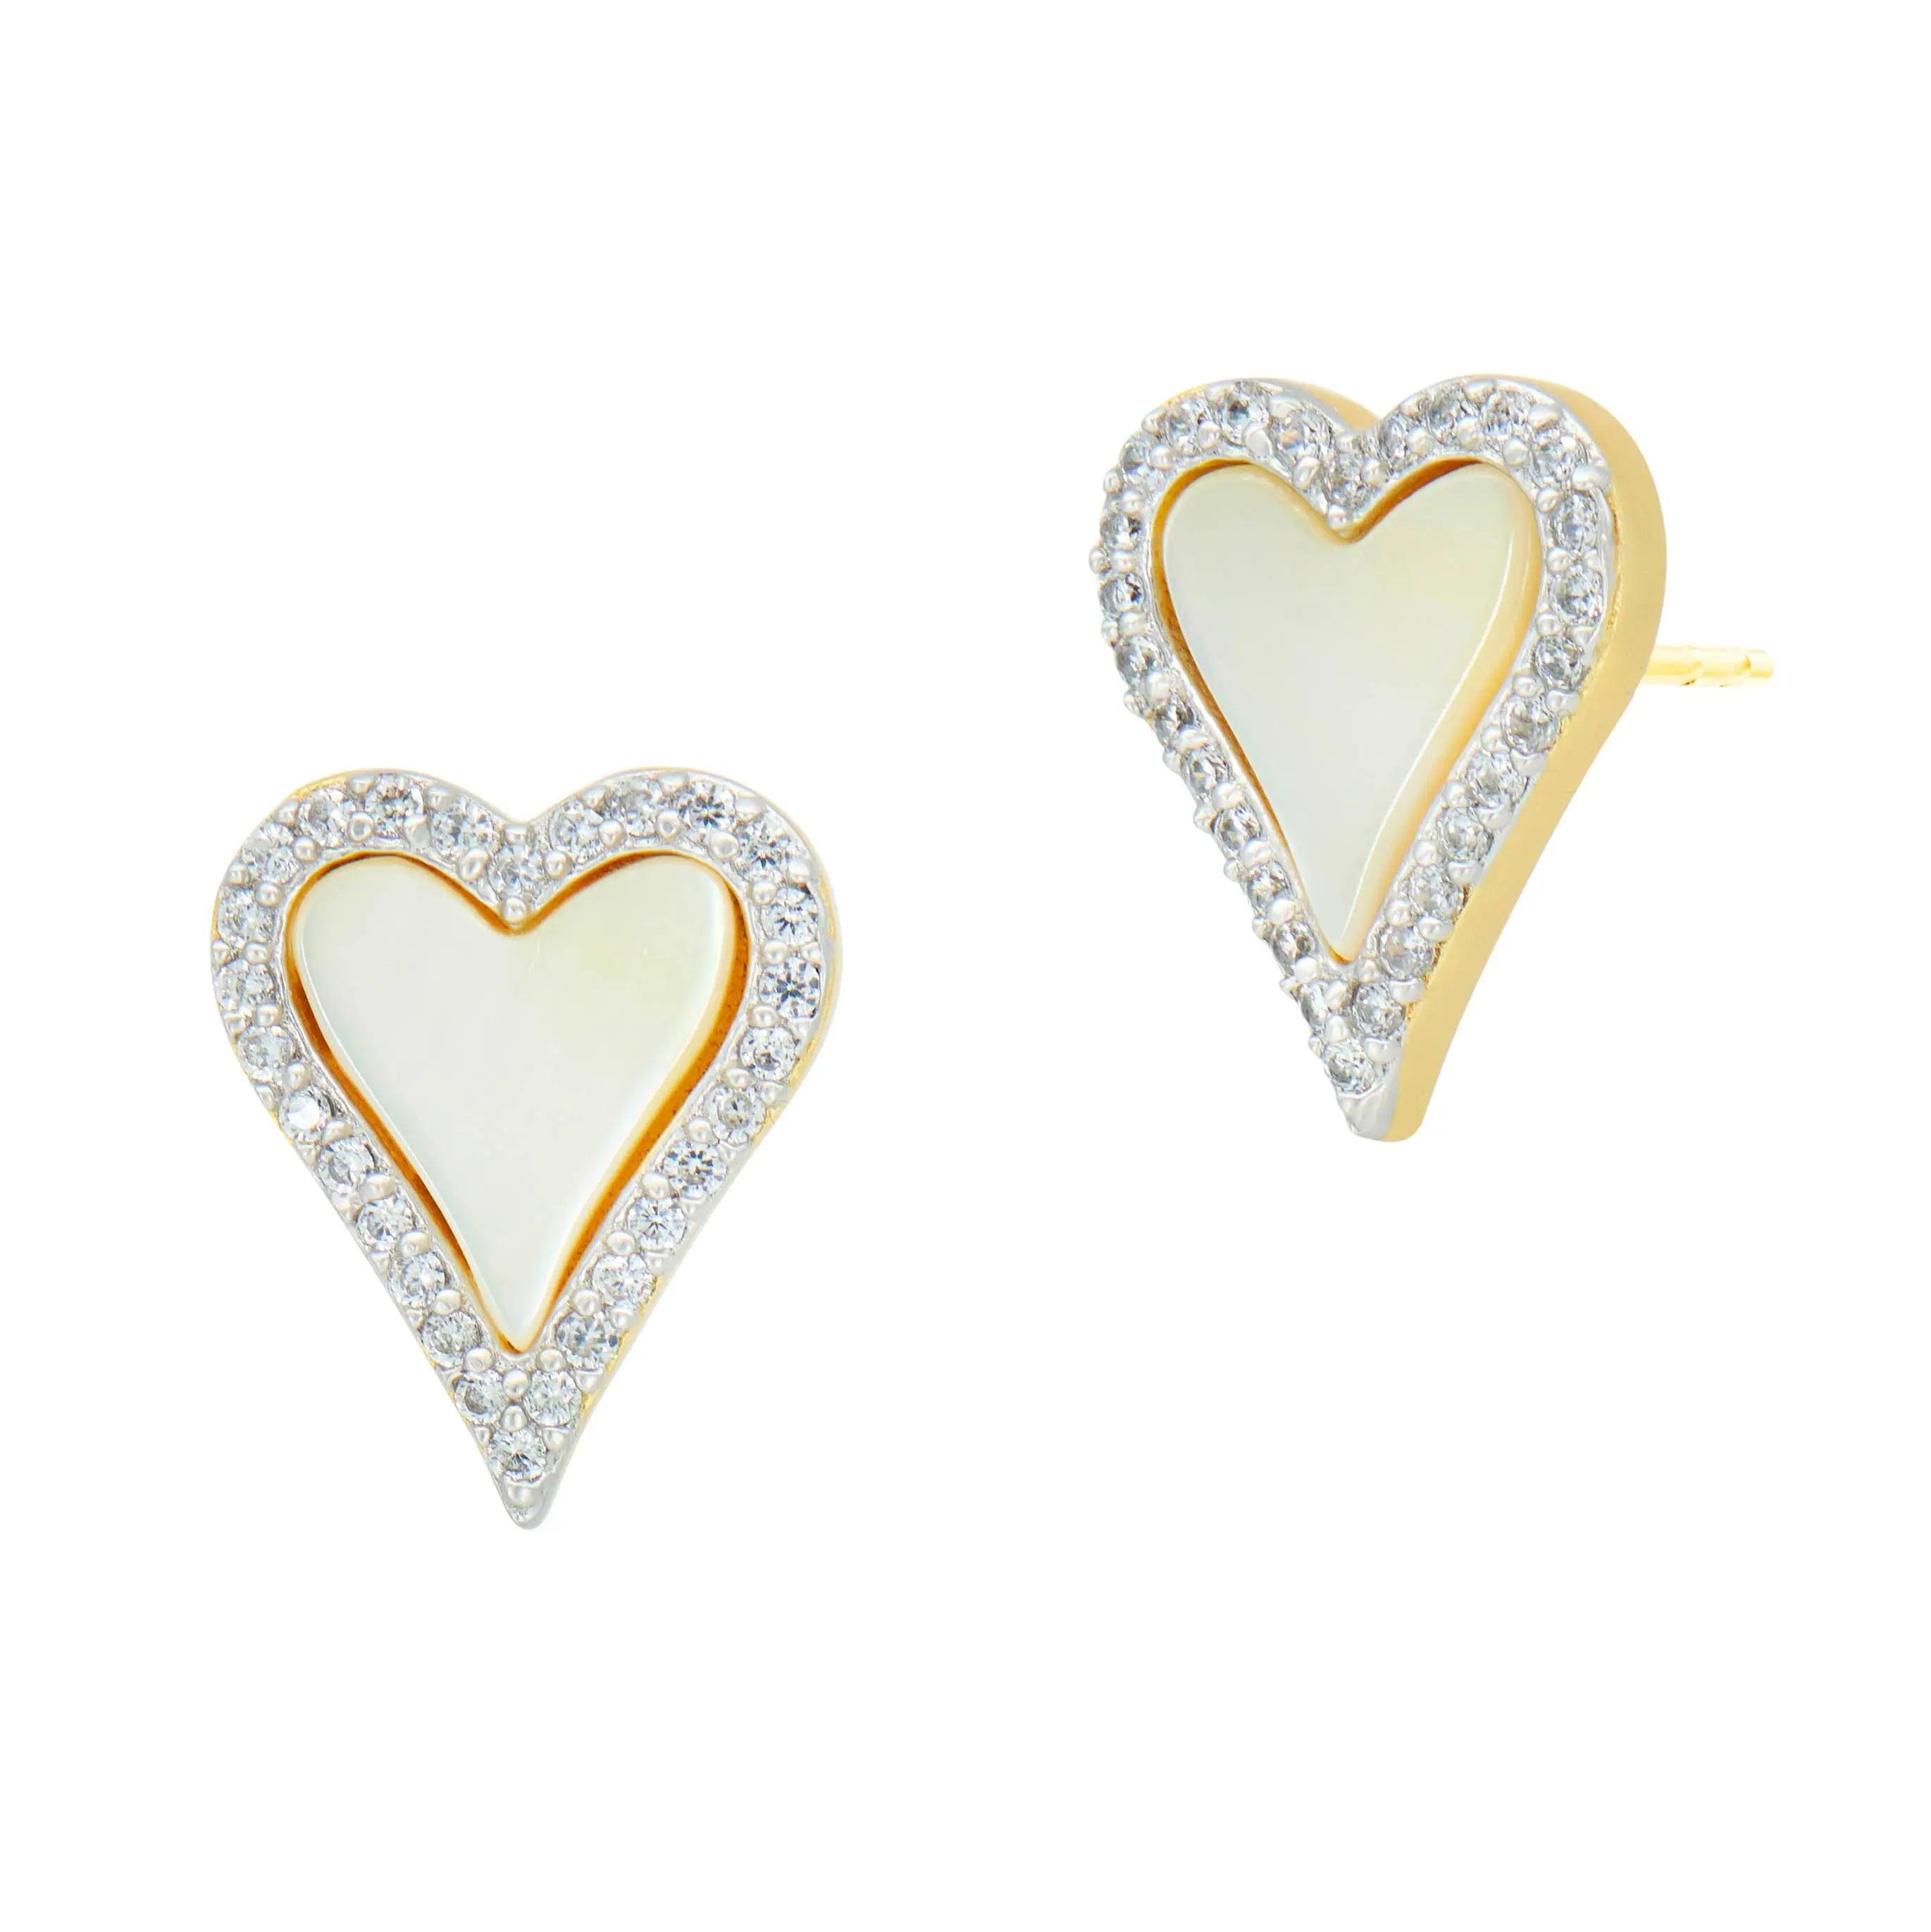 Freida Rothman From the Heart Mother of Pearl Heart Stud Earrings